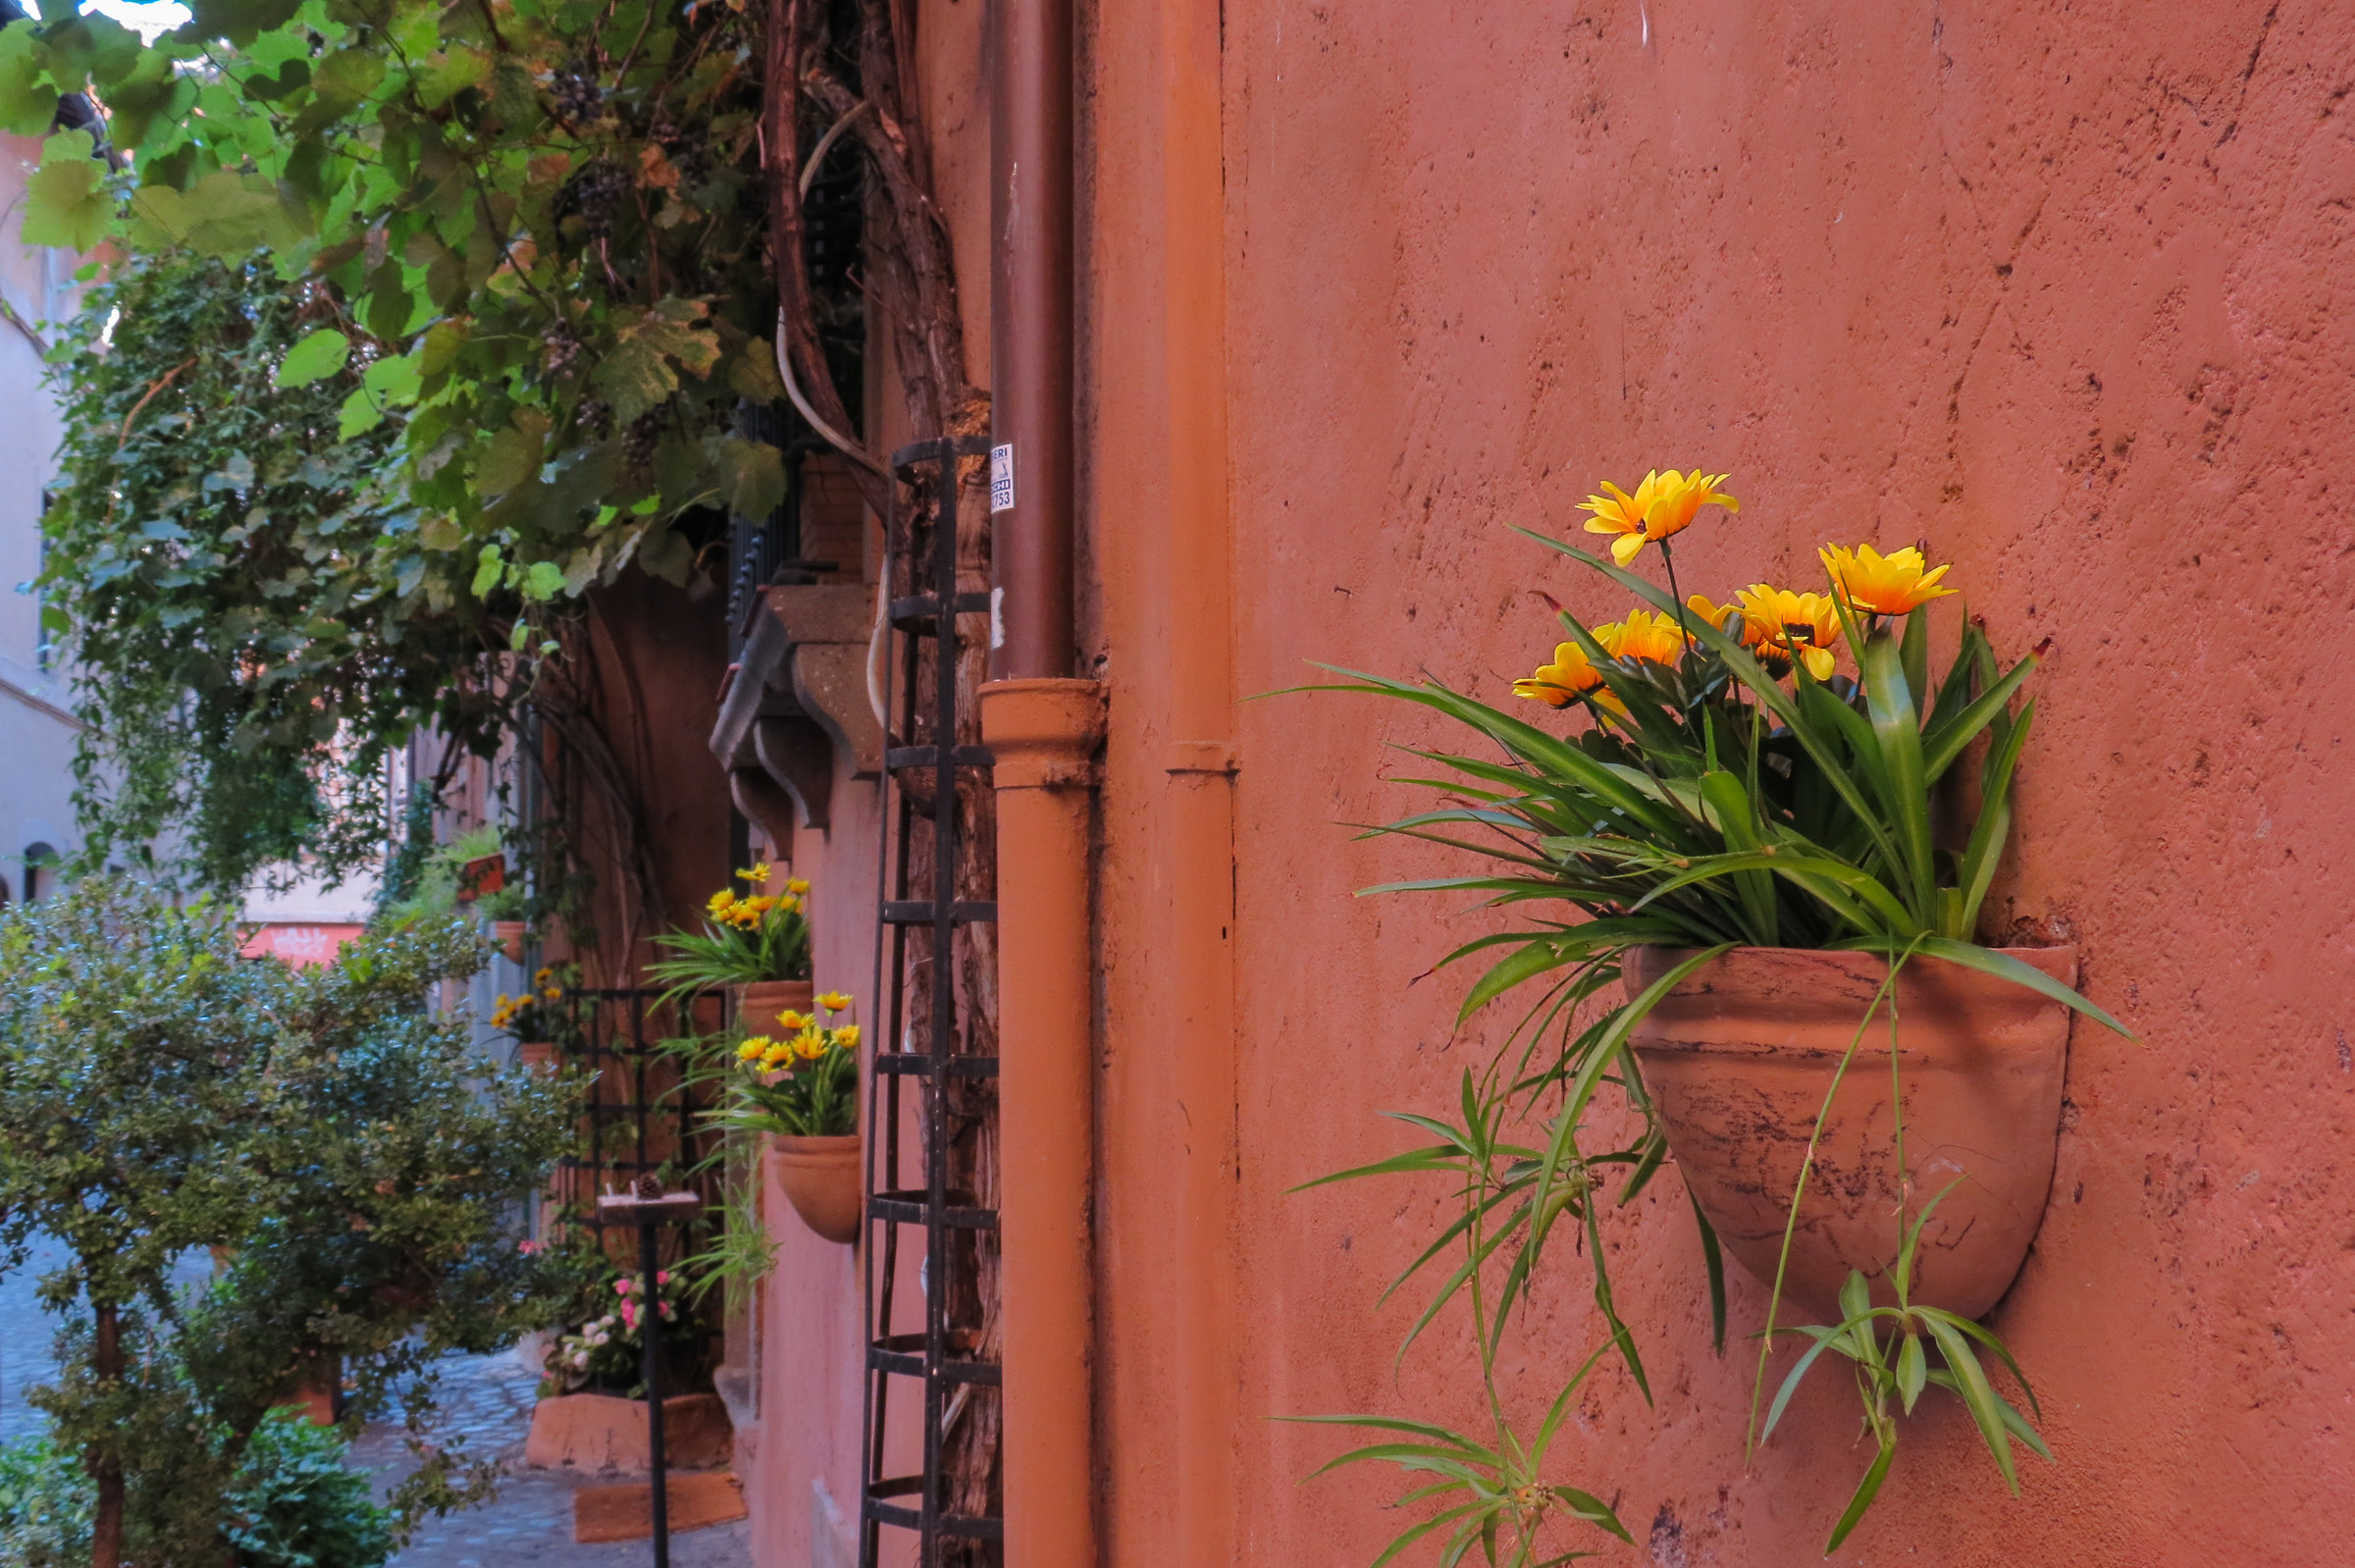 Flowers in the alleys...